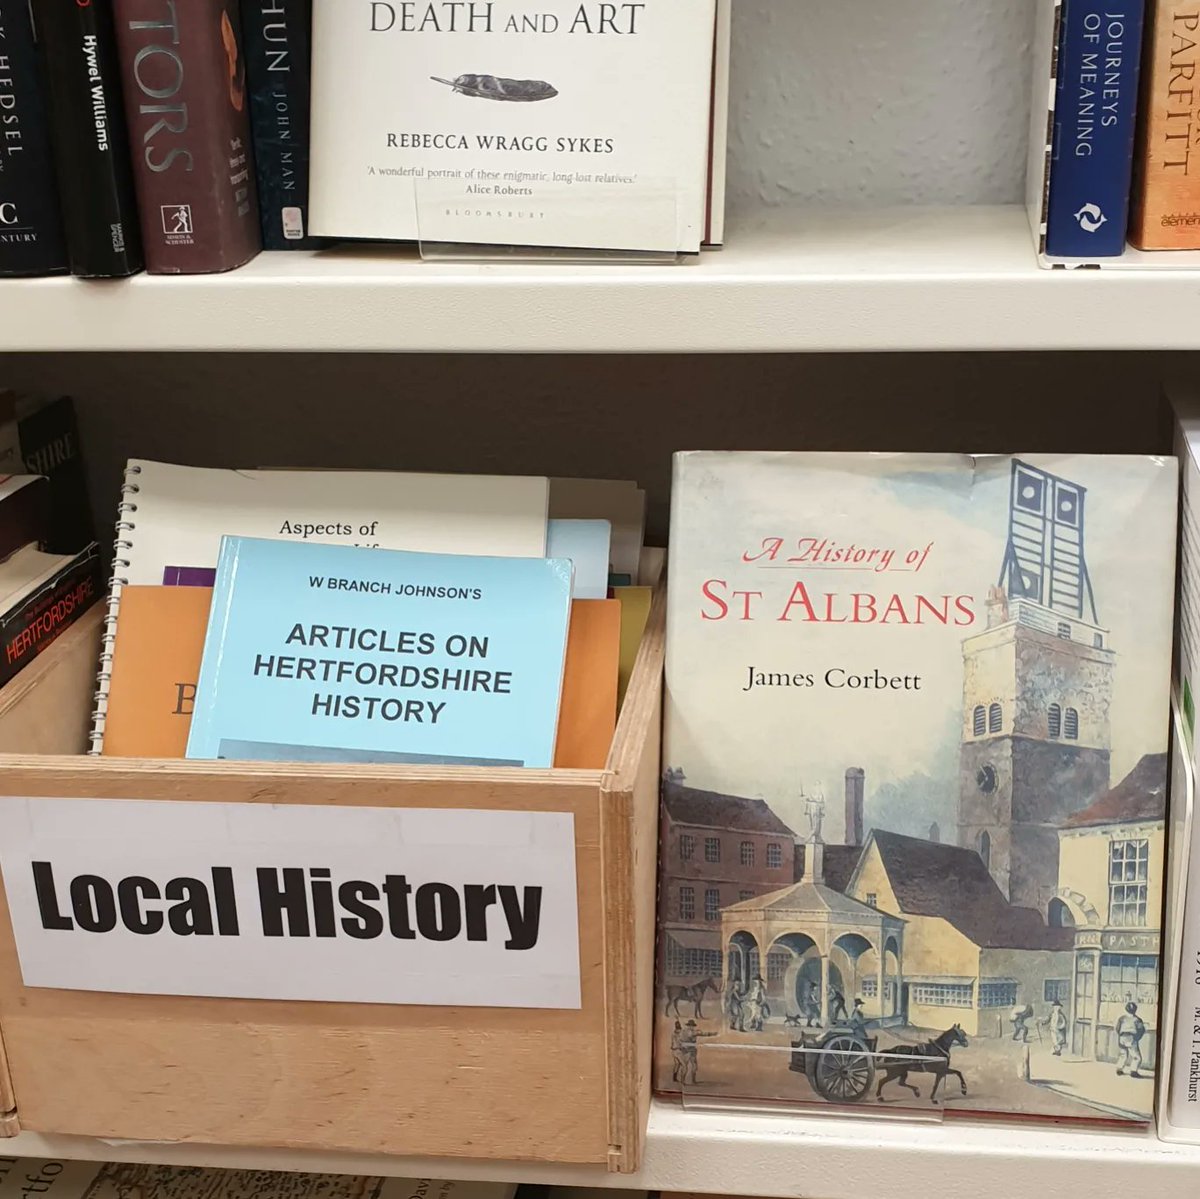 We've always had a #localhistory section here at #Oxfam #Books #Harpenden but this week we have something extra special for local history lovers to tie in with Harpenden History Society #LocalHistoryDay @theemorecambec today! Come for a browse at 5, Harding Parade! #HarpendenLife